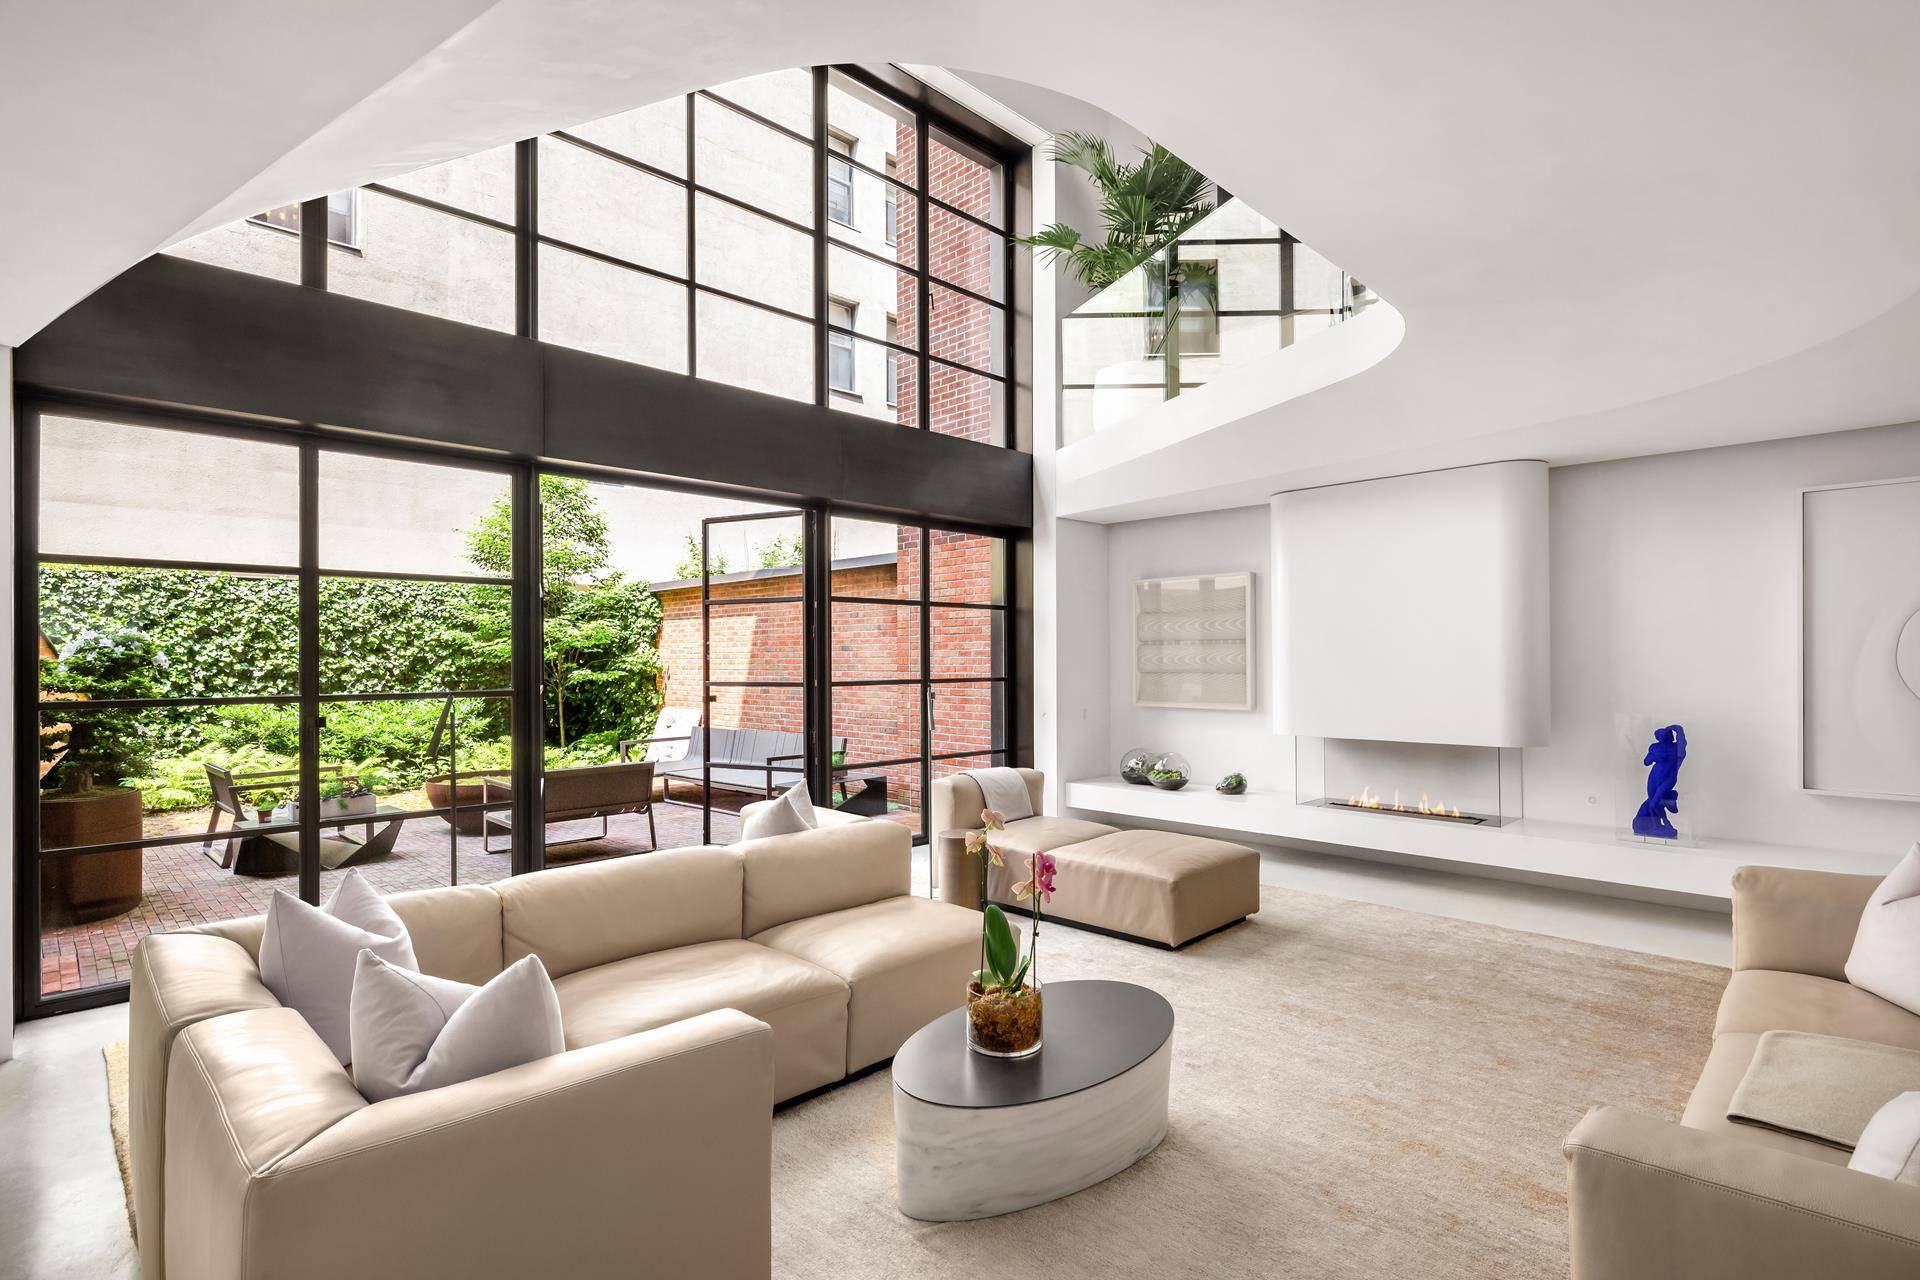 This award winning West Village townhouse is truly one of a kind.